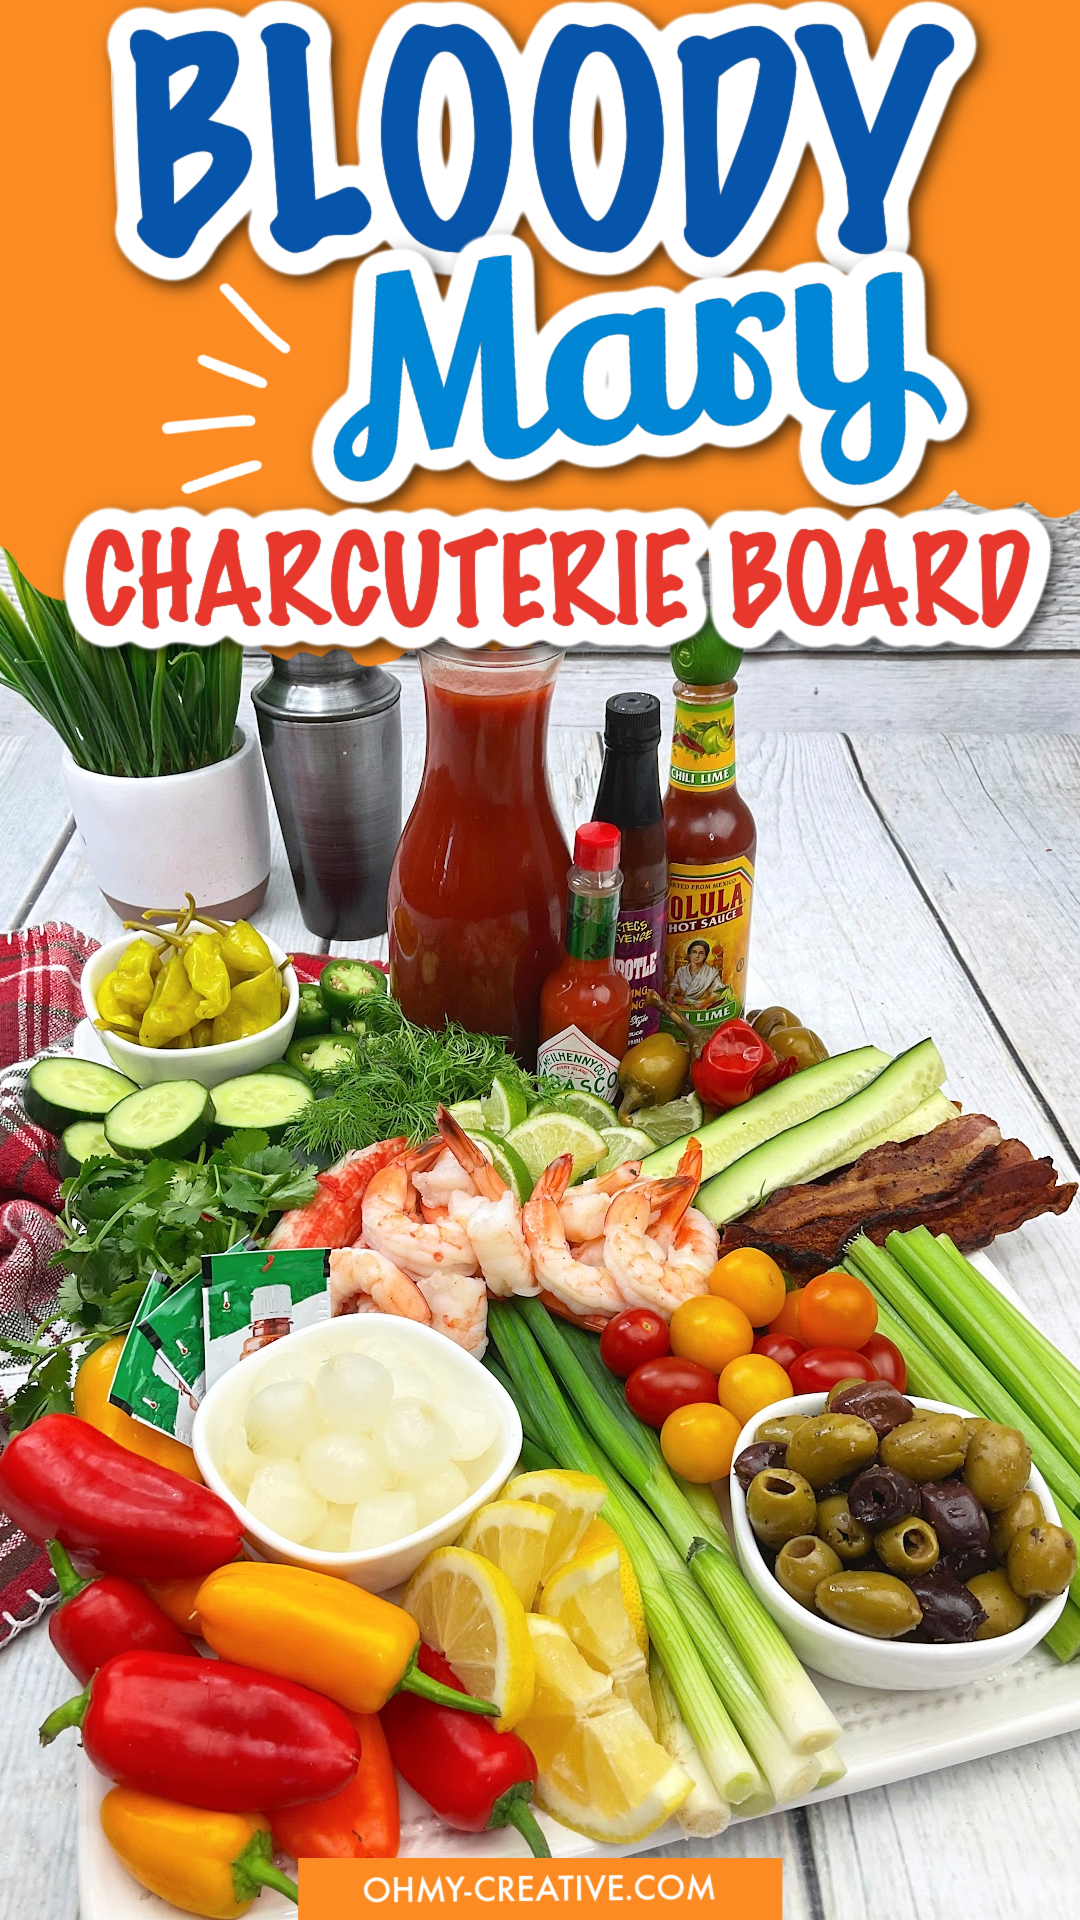 Easy Bloody Mary Charcuterie Board For Brunch